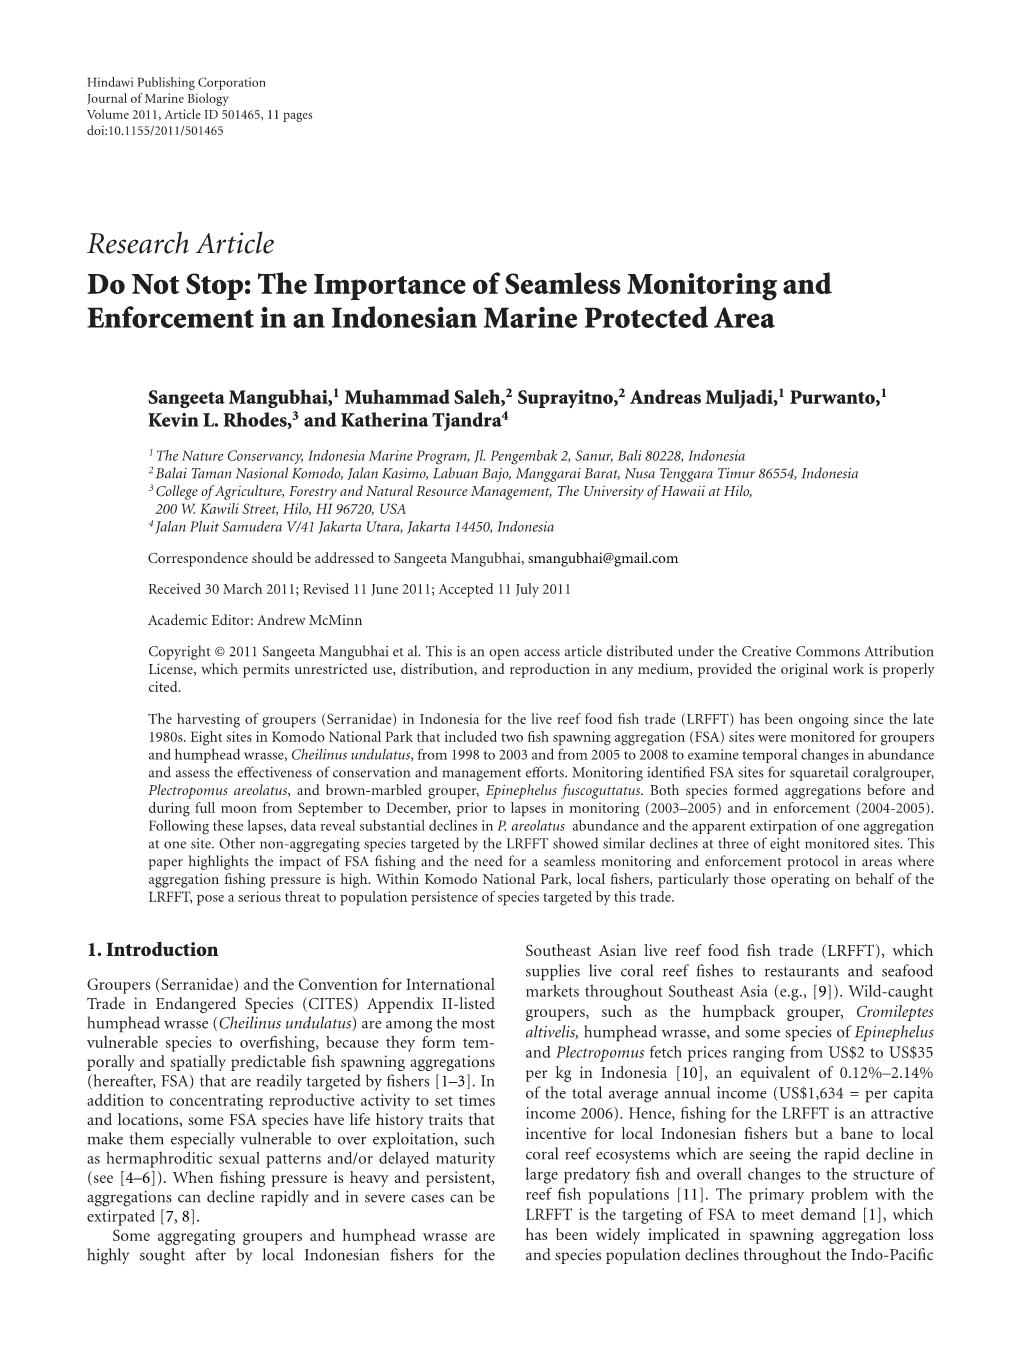 Research Article Do Not Stop: the Importance of Seamless Monitoring and Enforcement in an Indonesian Marine Protected Area